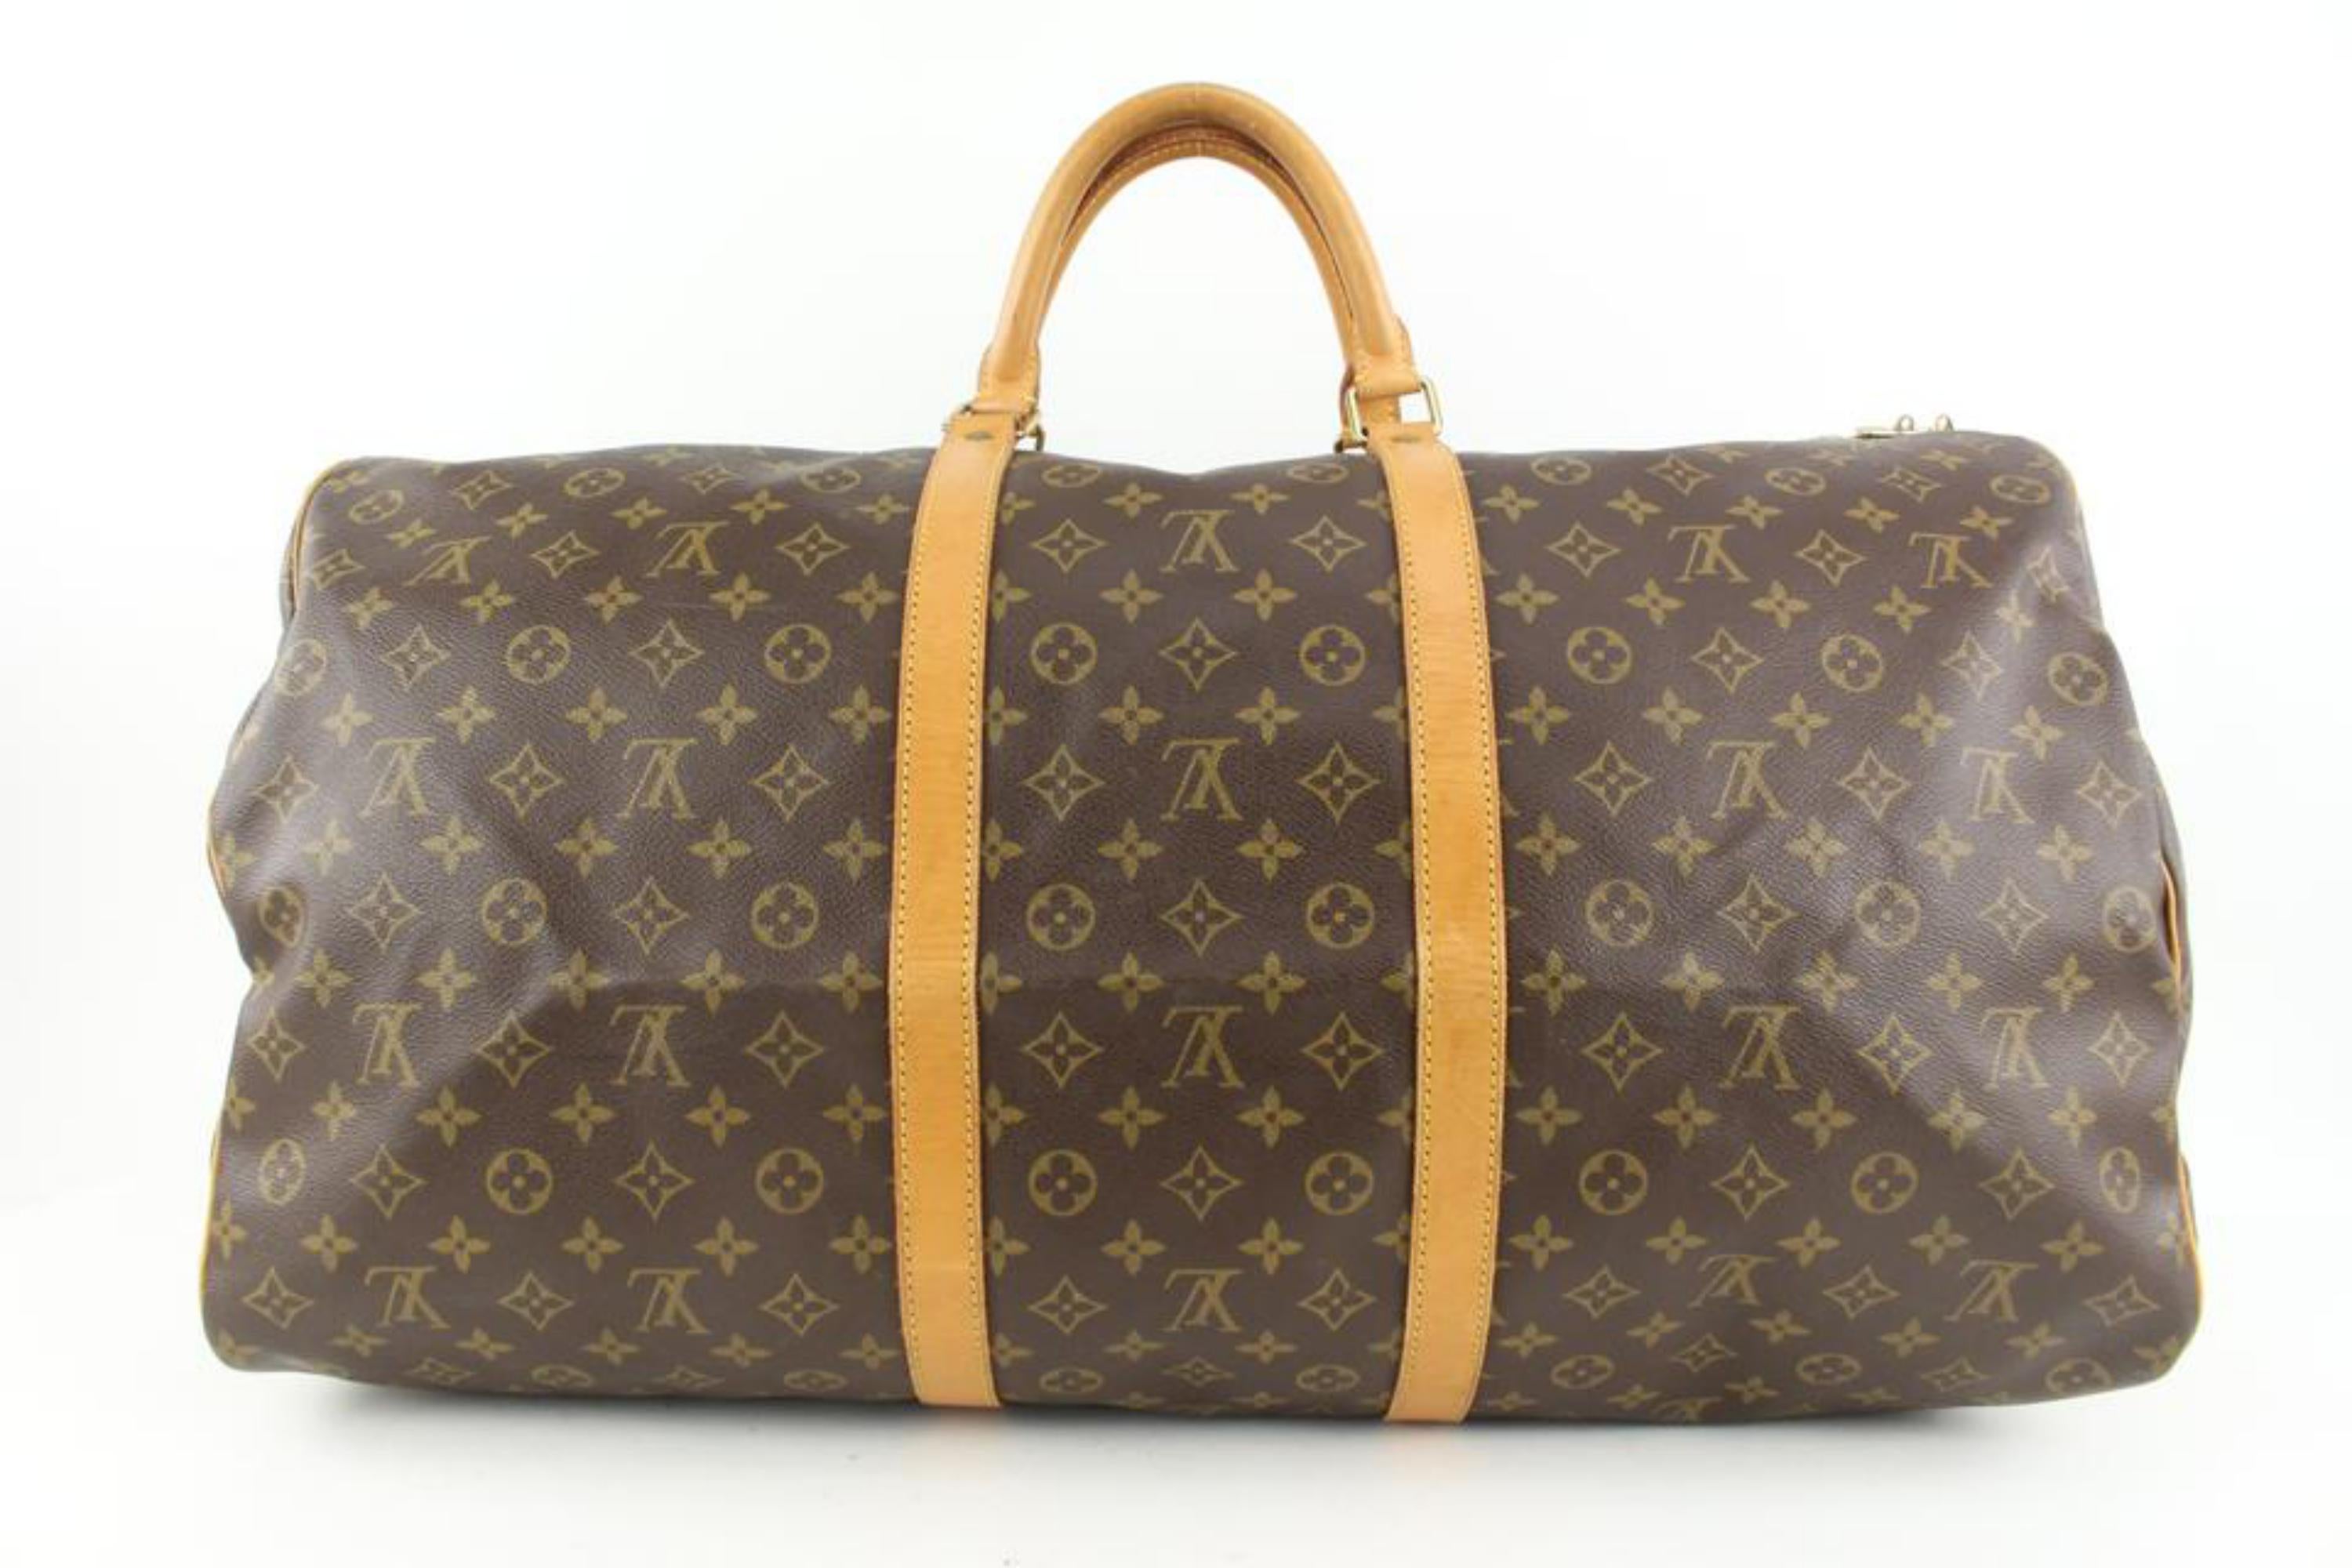 Louis Vuitton Large Monogram Keepall Bandouliere 60 Duffle with Strap 110lv55 For Sale 1